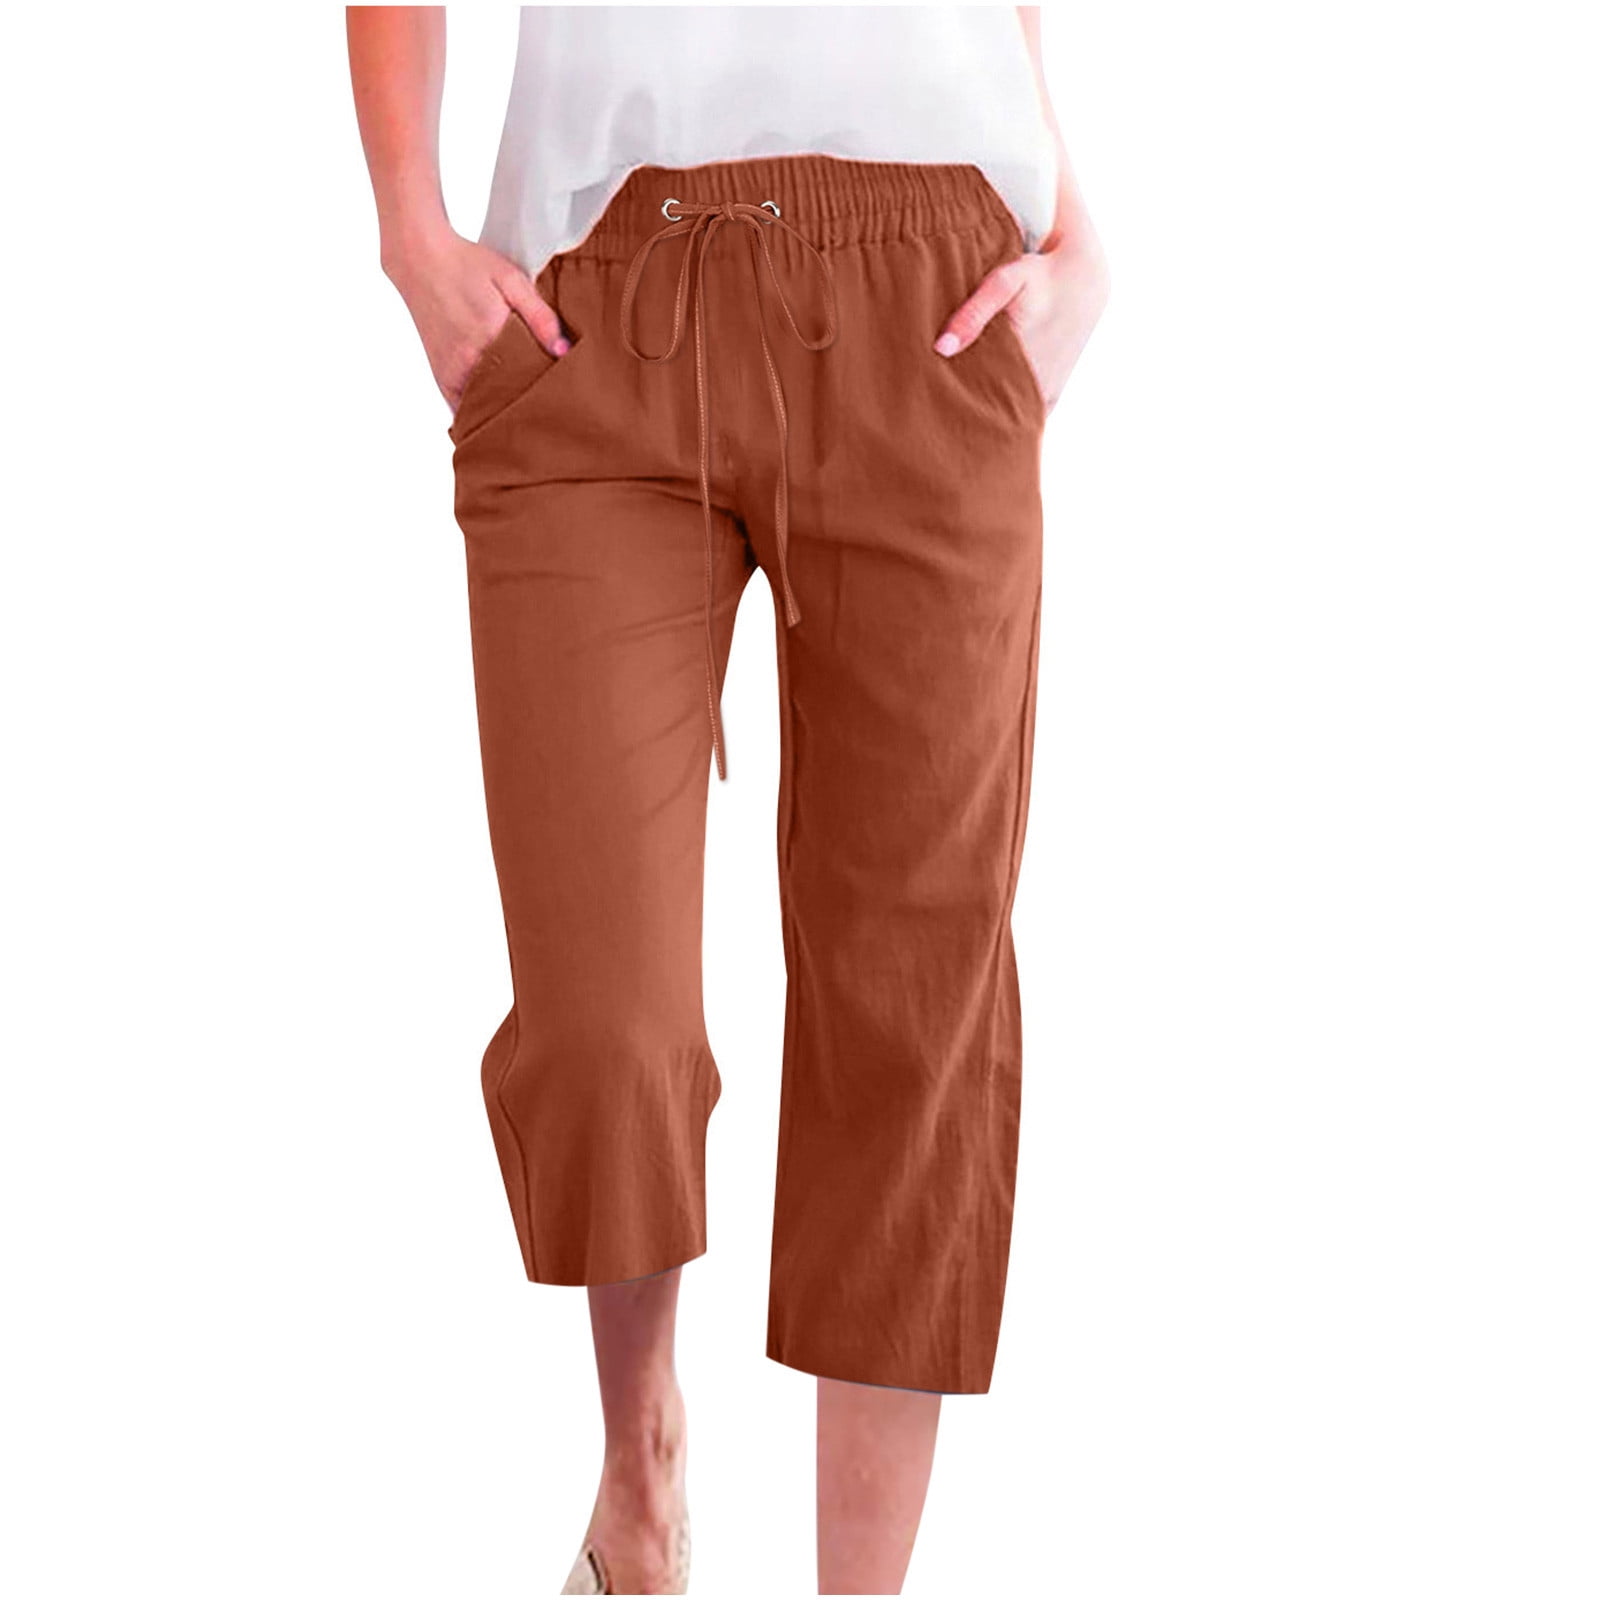 Xihbxyly Linen Pants for Women Womens Pants Cotton Linen Long Lounge Pants  Drawstring Back Elastic Waist Pants Casual Trousers with Pockets, Coffee